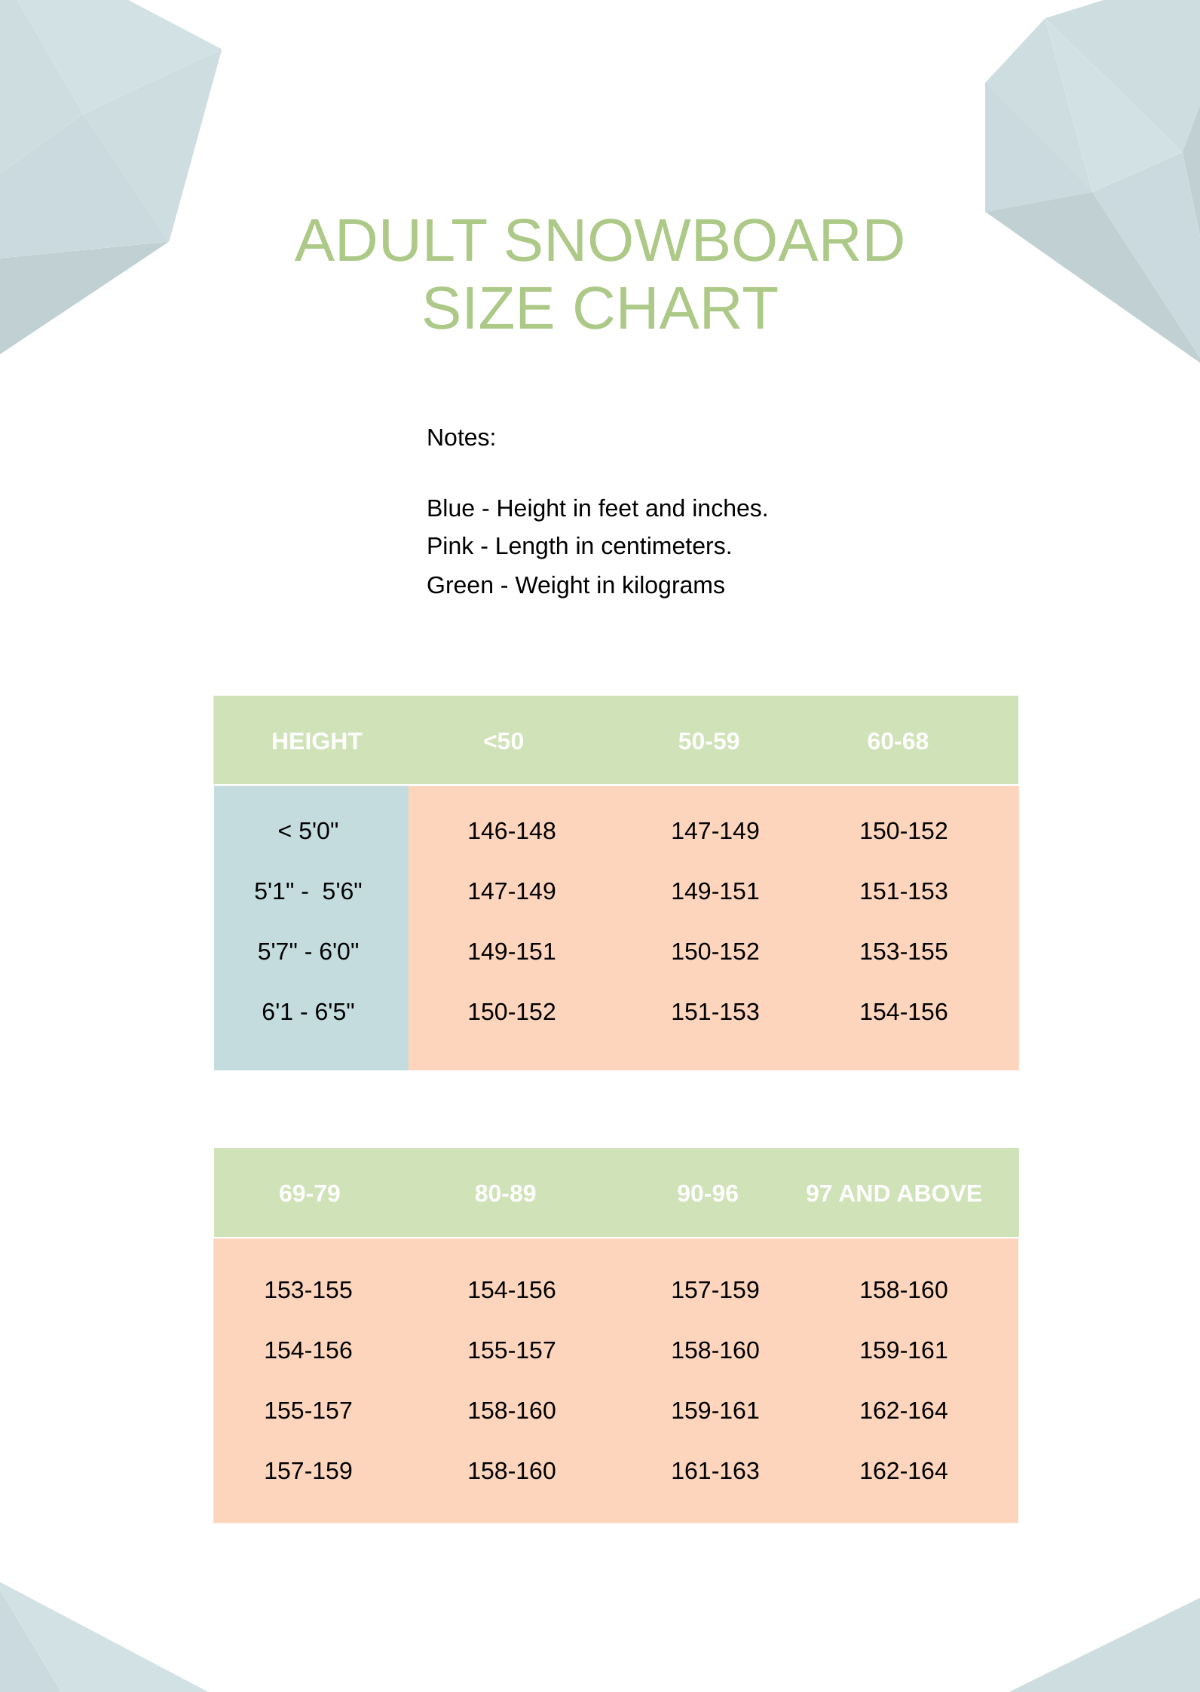 Adult Snowboard Size Chart Template